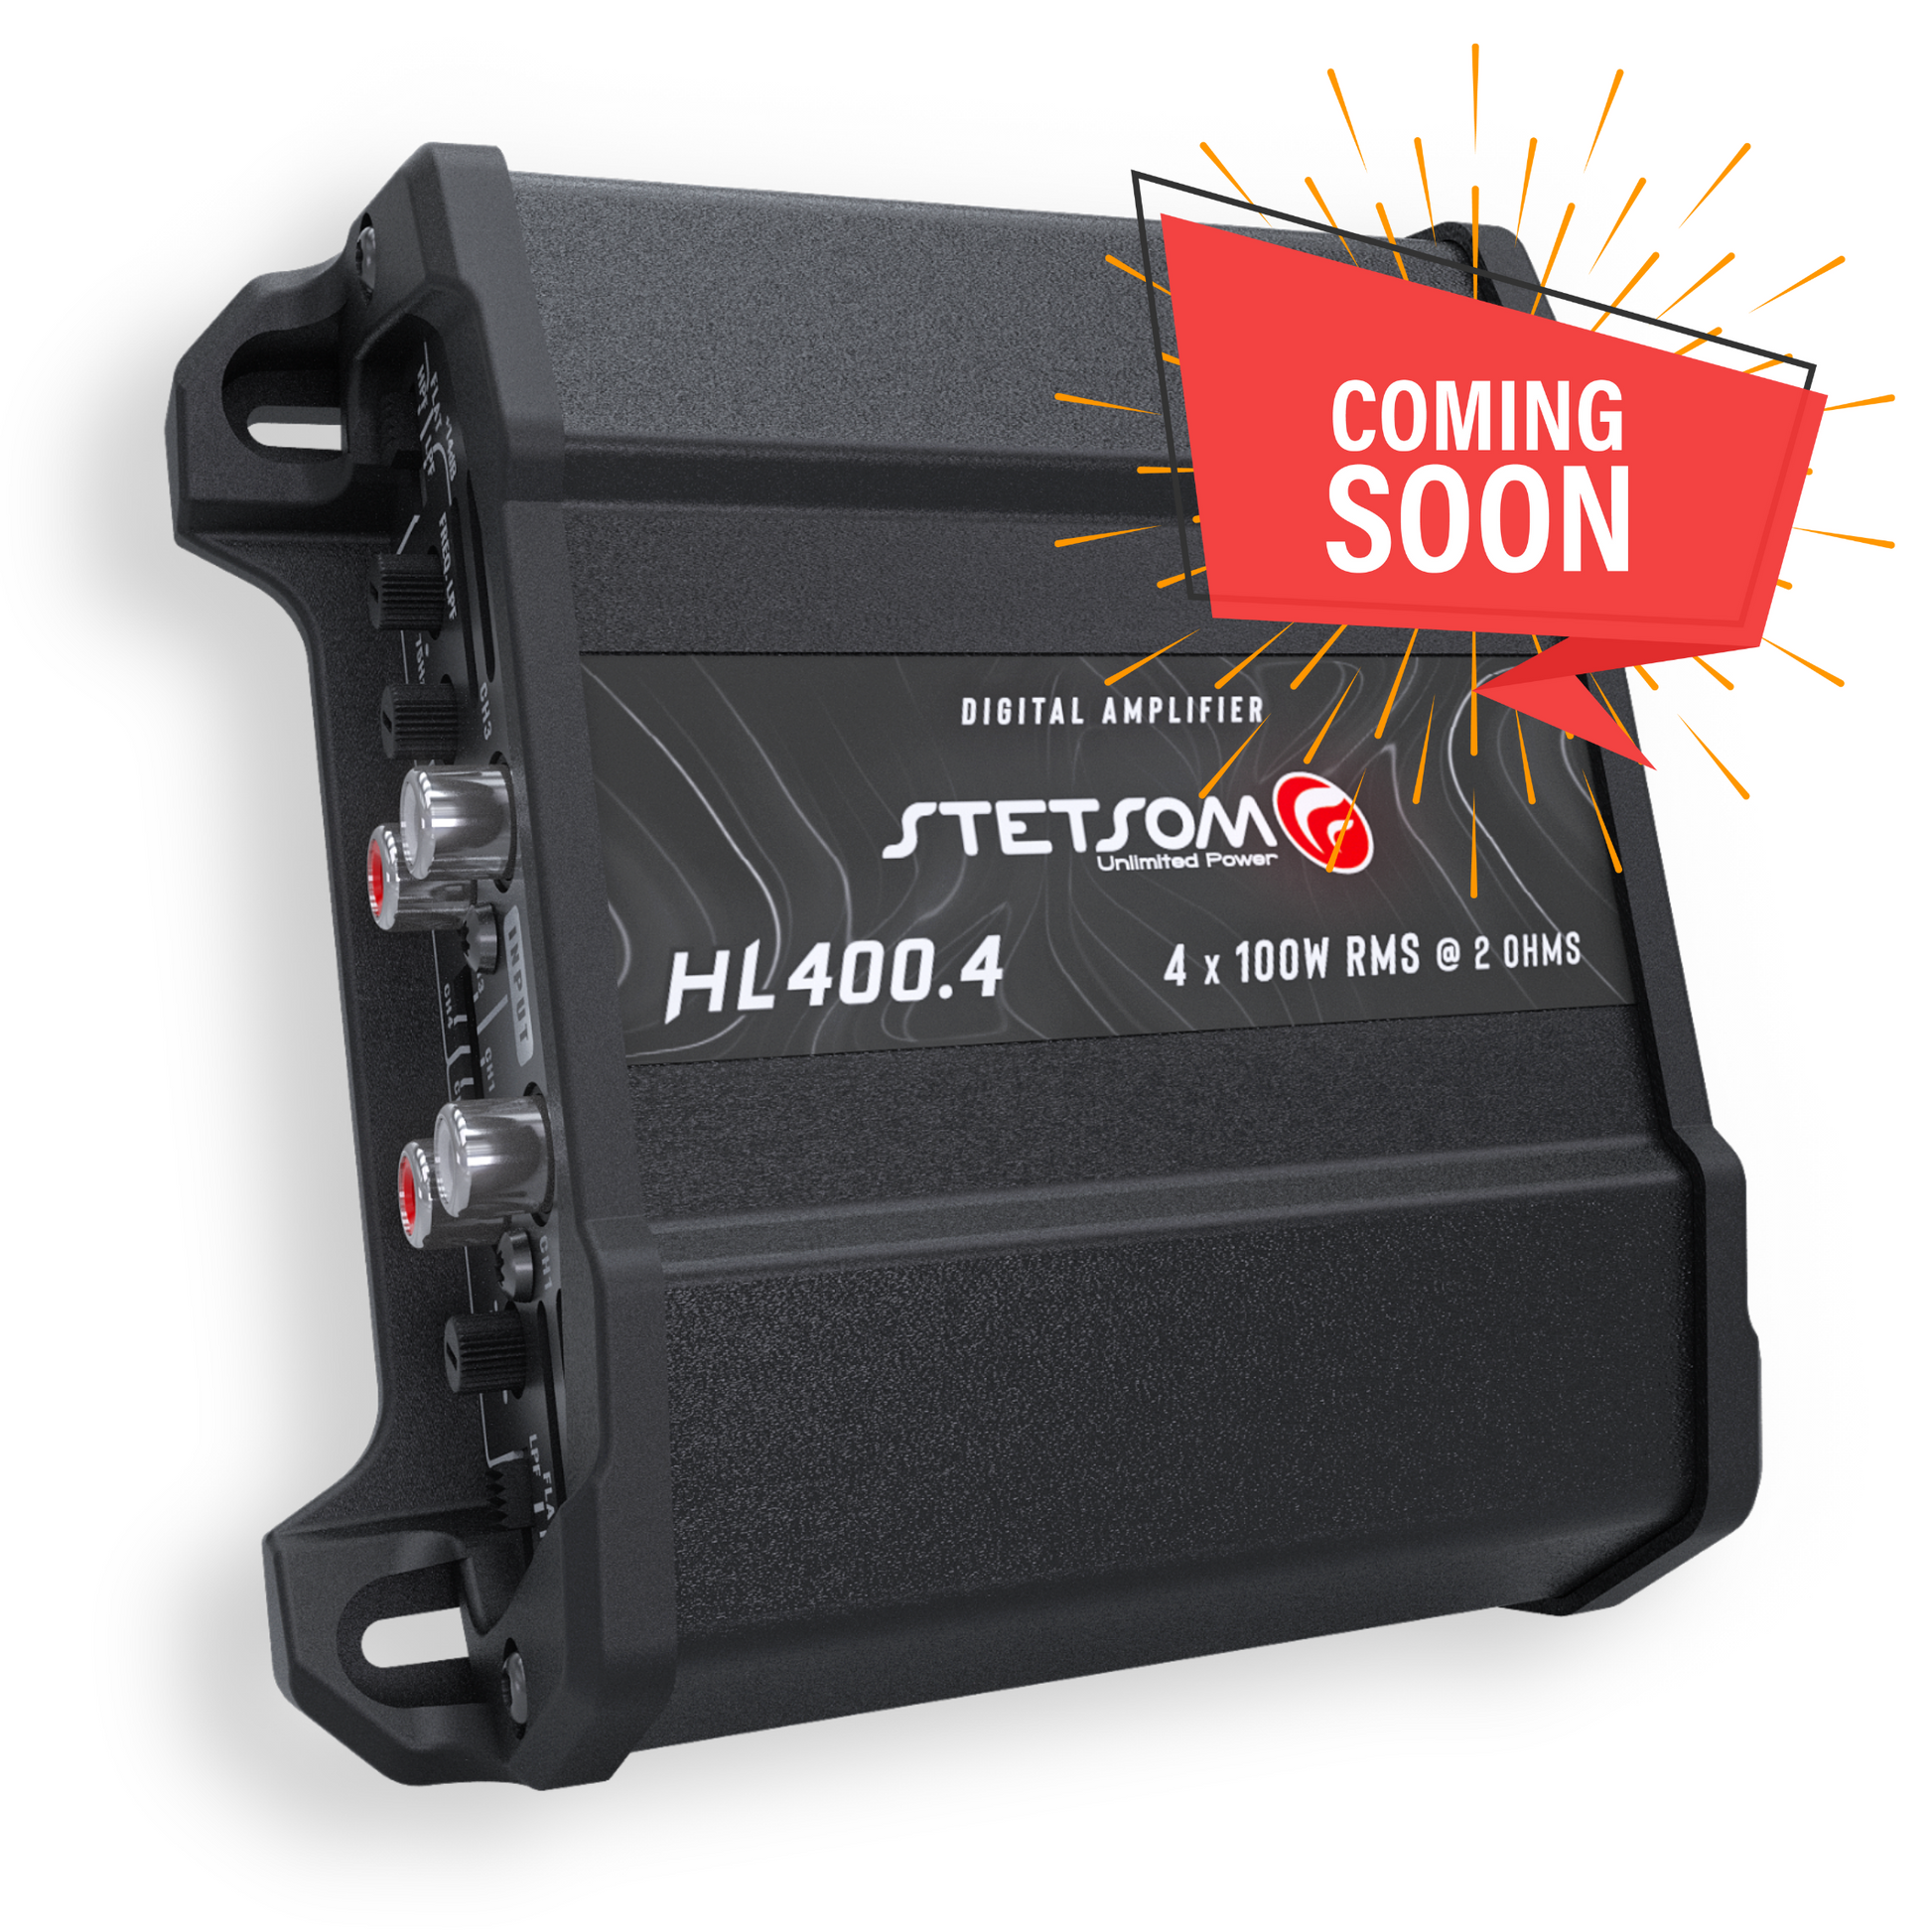 Stetsom HL 400.4 Class D Full Range Amplifier 4 Channel 400 Watts, RCA Input and High Wire Input, Variable Crossover